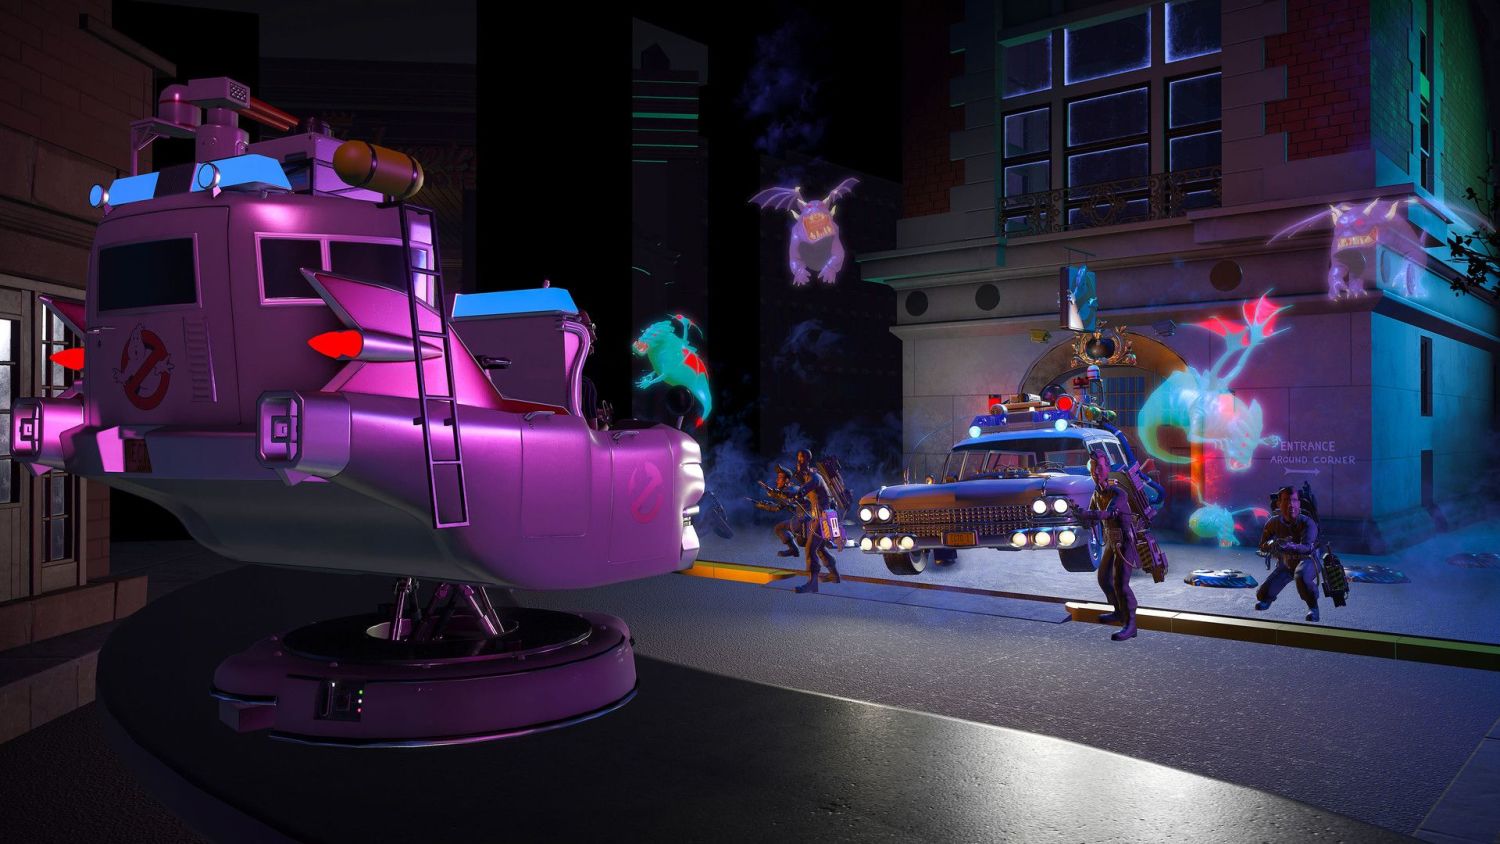 planet coaster ghostbusters download free